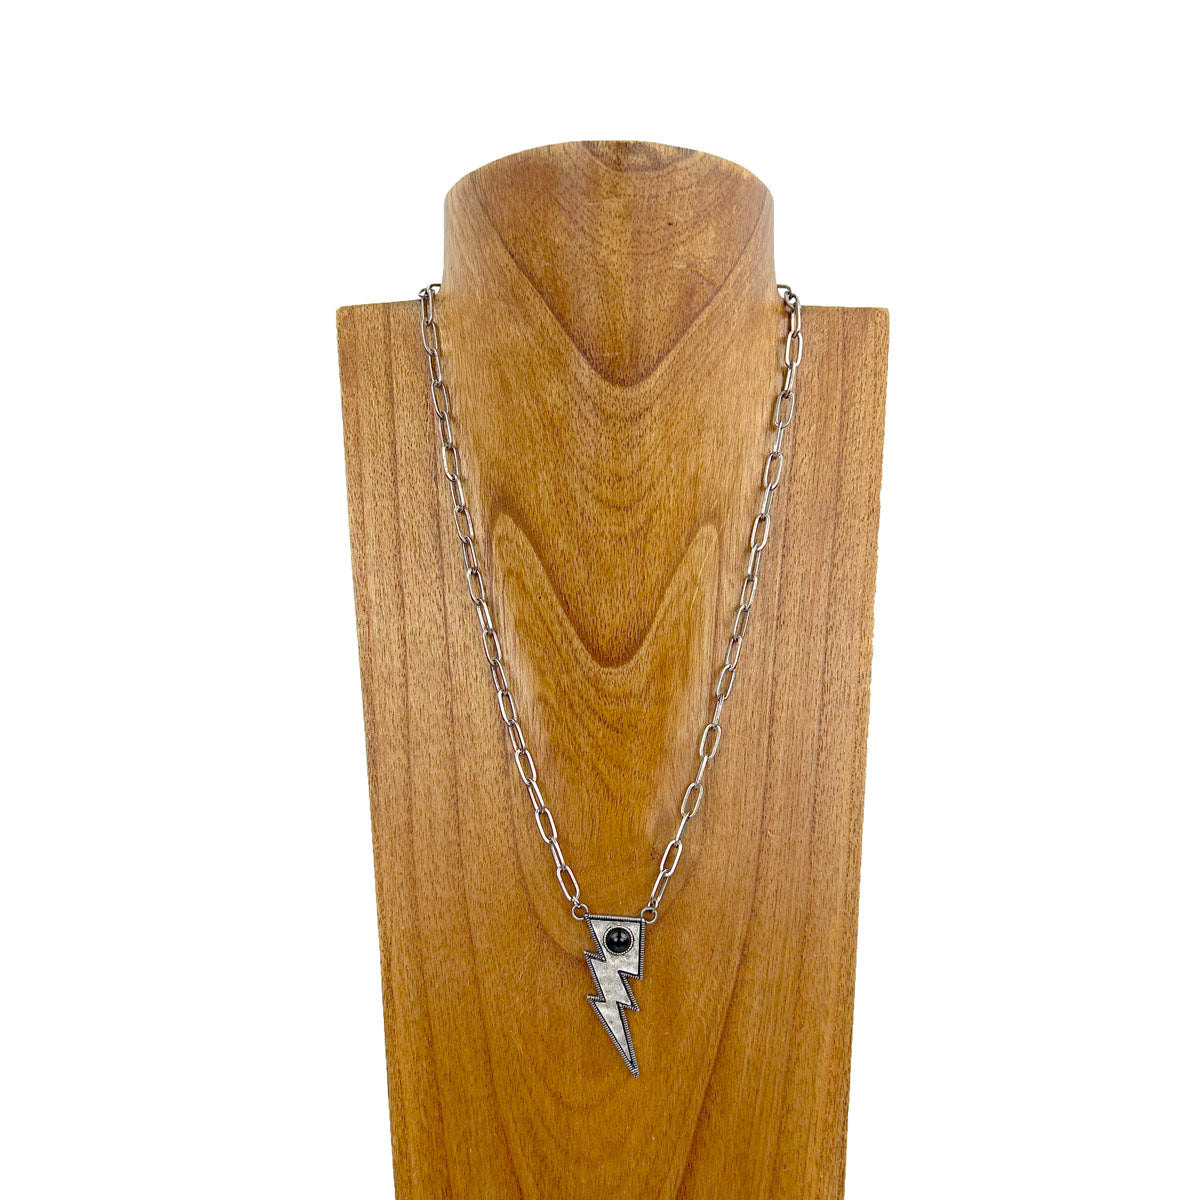 NKY231115-04-BLUE              23 inches silver metal chain with blue turquoise stone lightning bolt Necklace